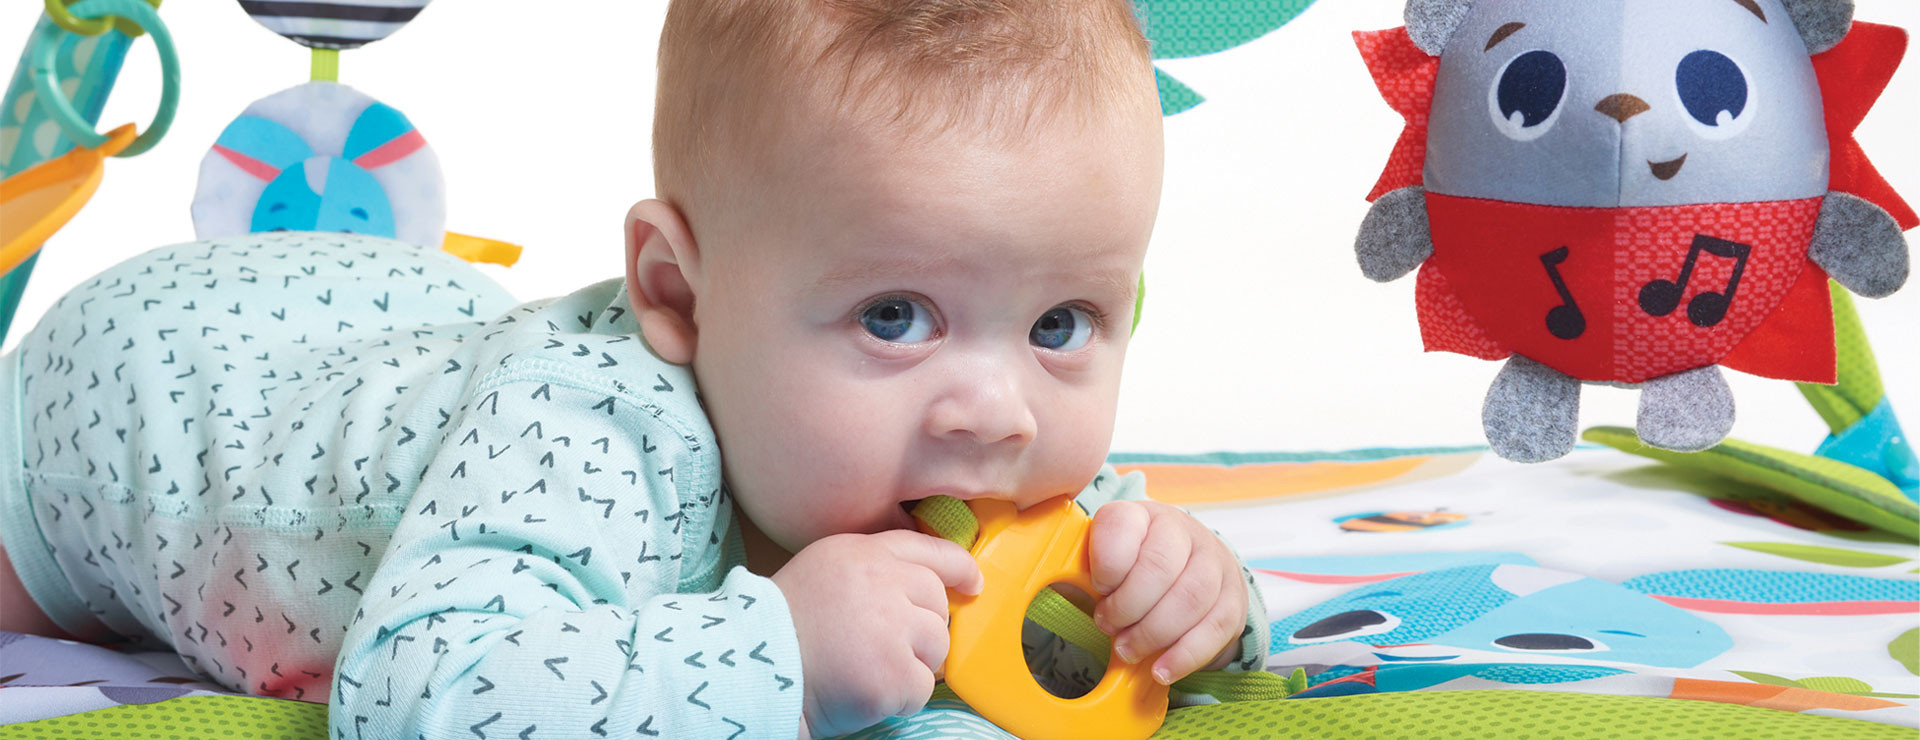 Carrot shape teether and other attached toys stimulate the senses